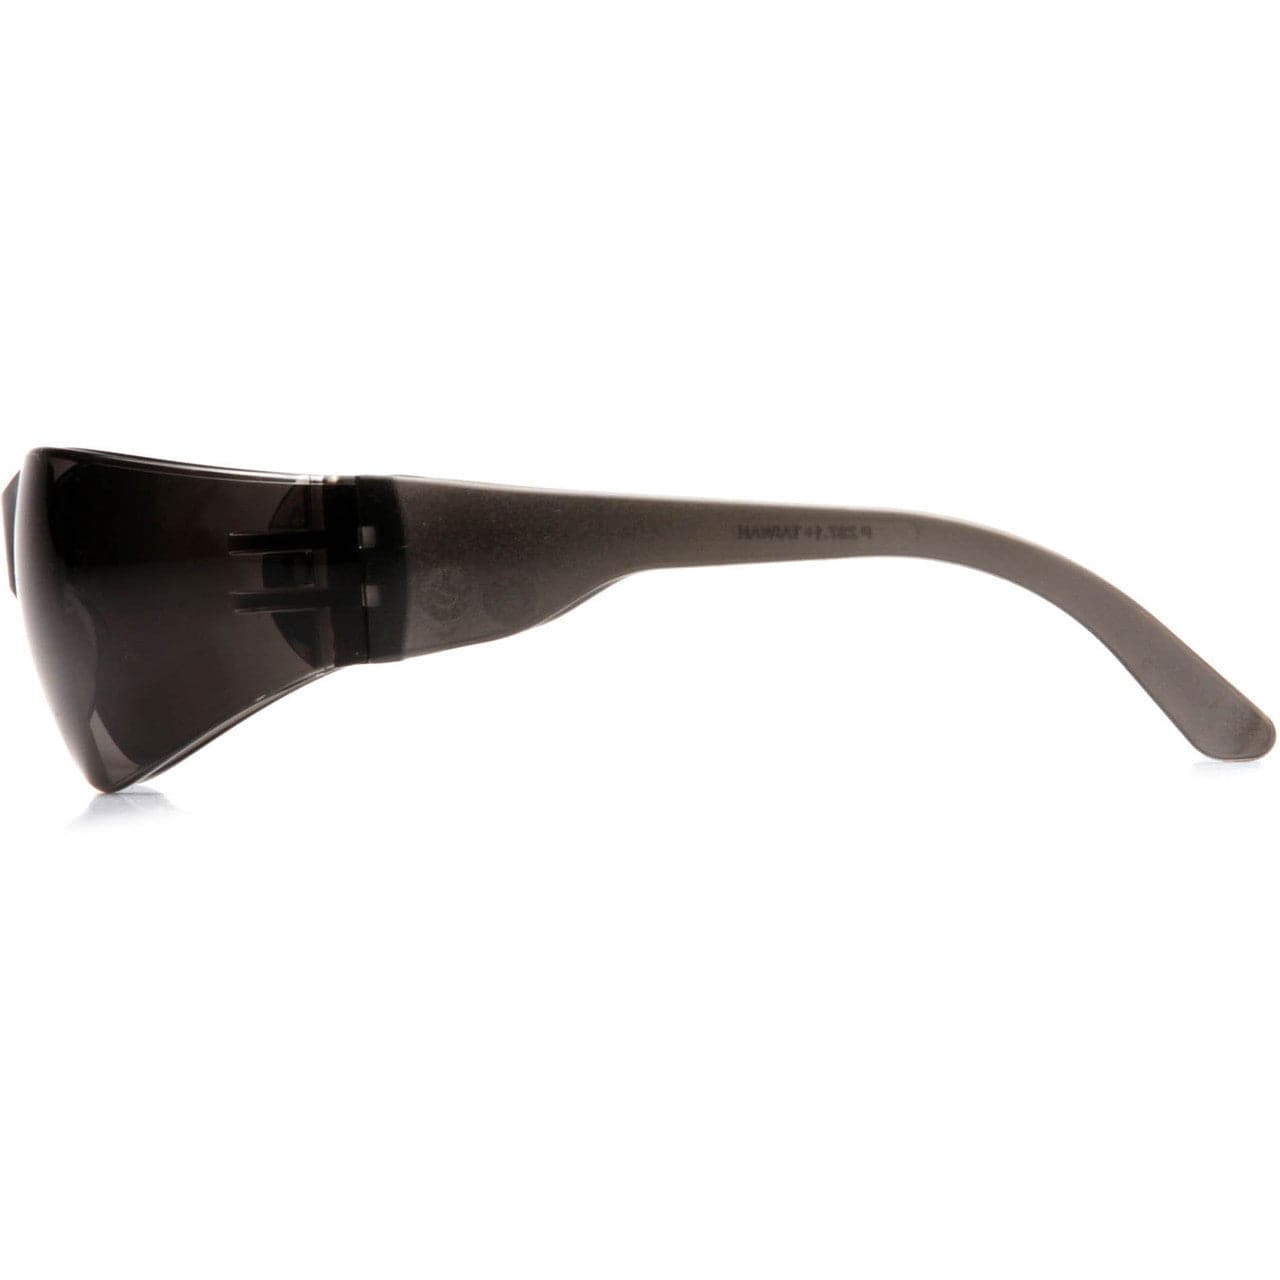 Pyramex Mini Intruder Safety Glasses with Gray Lens S4120SN Side View